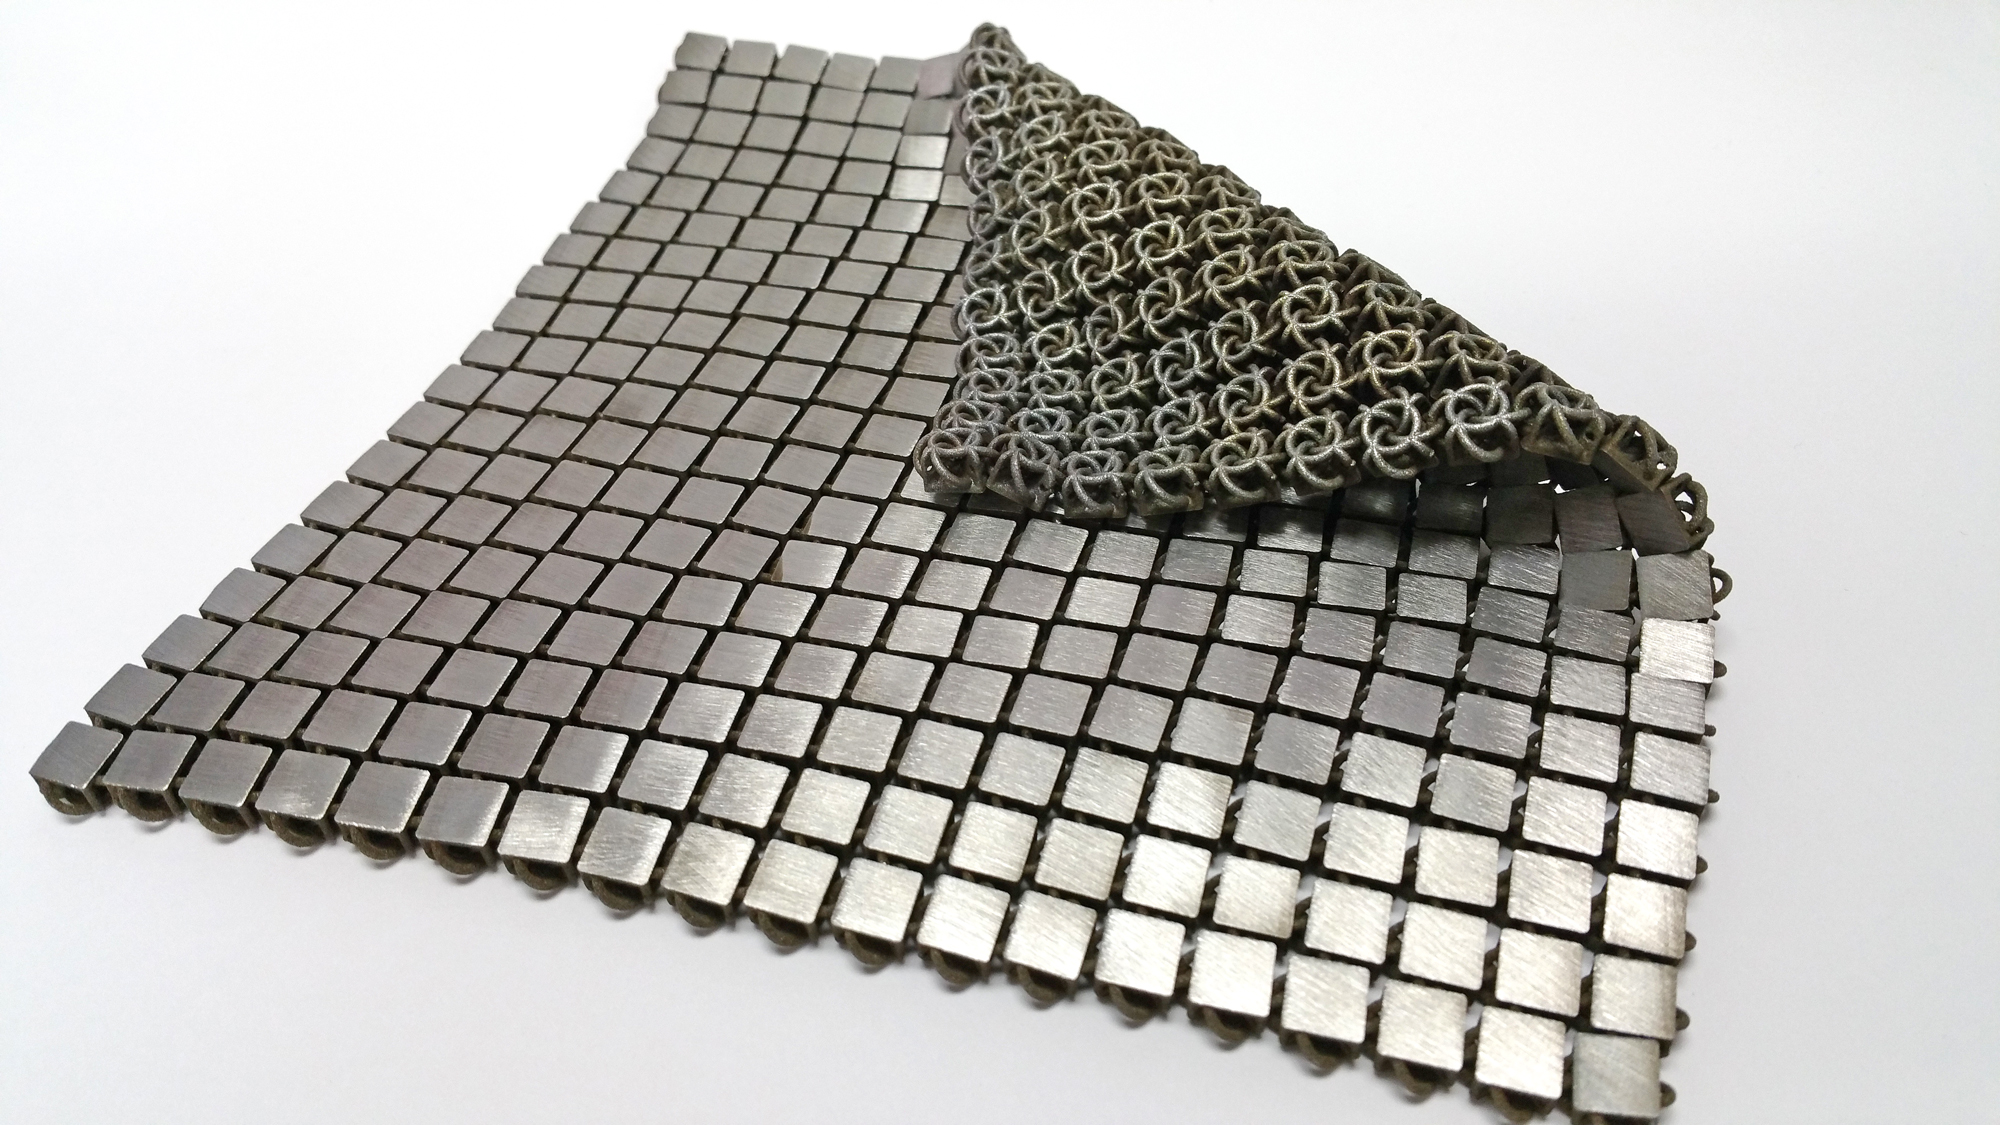 NASA Is Developing 3D-Printed Chain Mail To Protect Ships And Astronauts